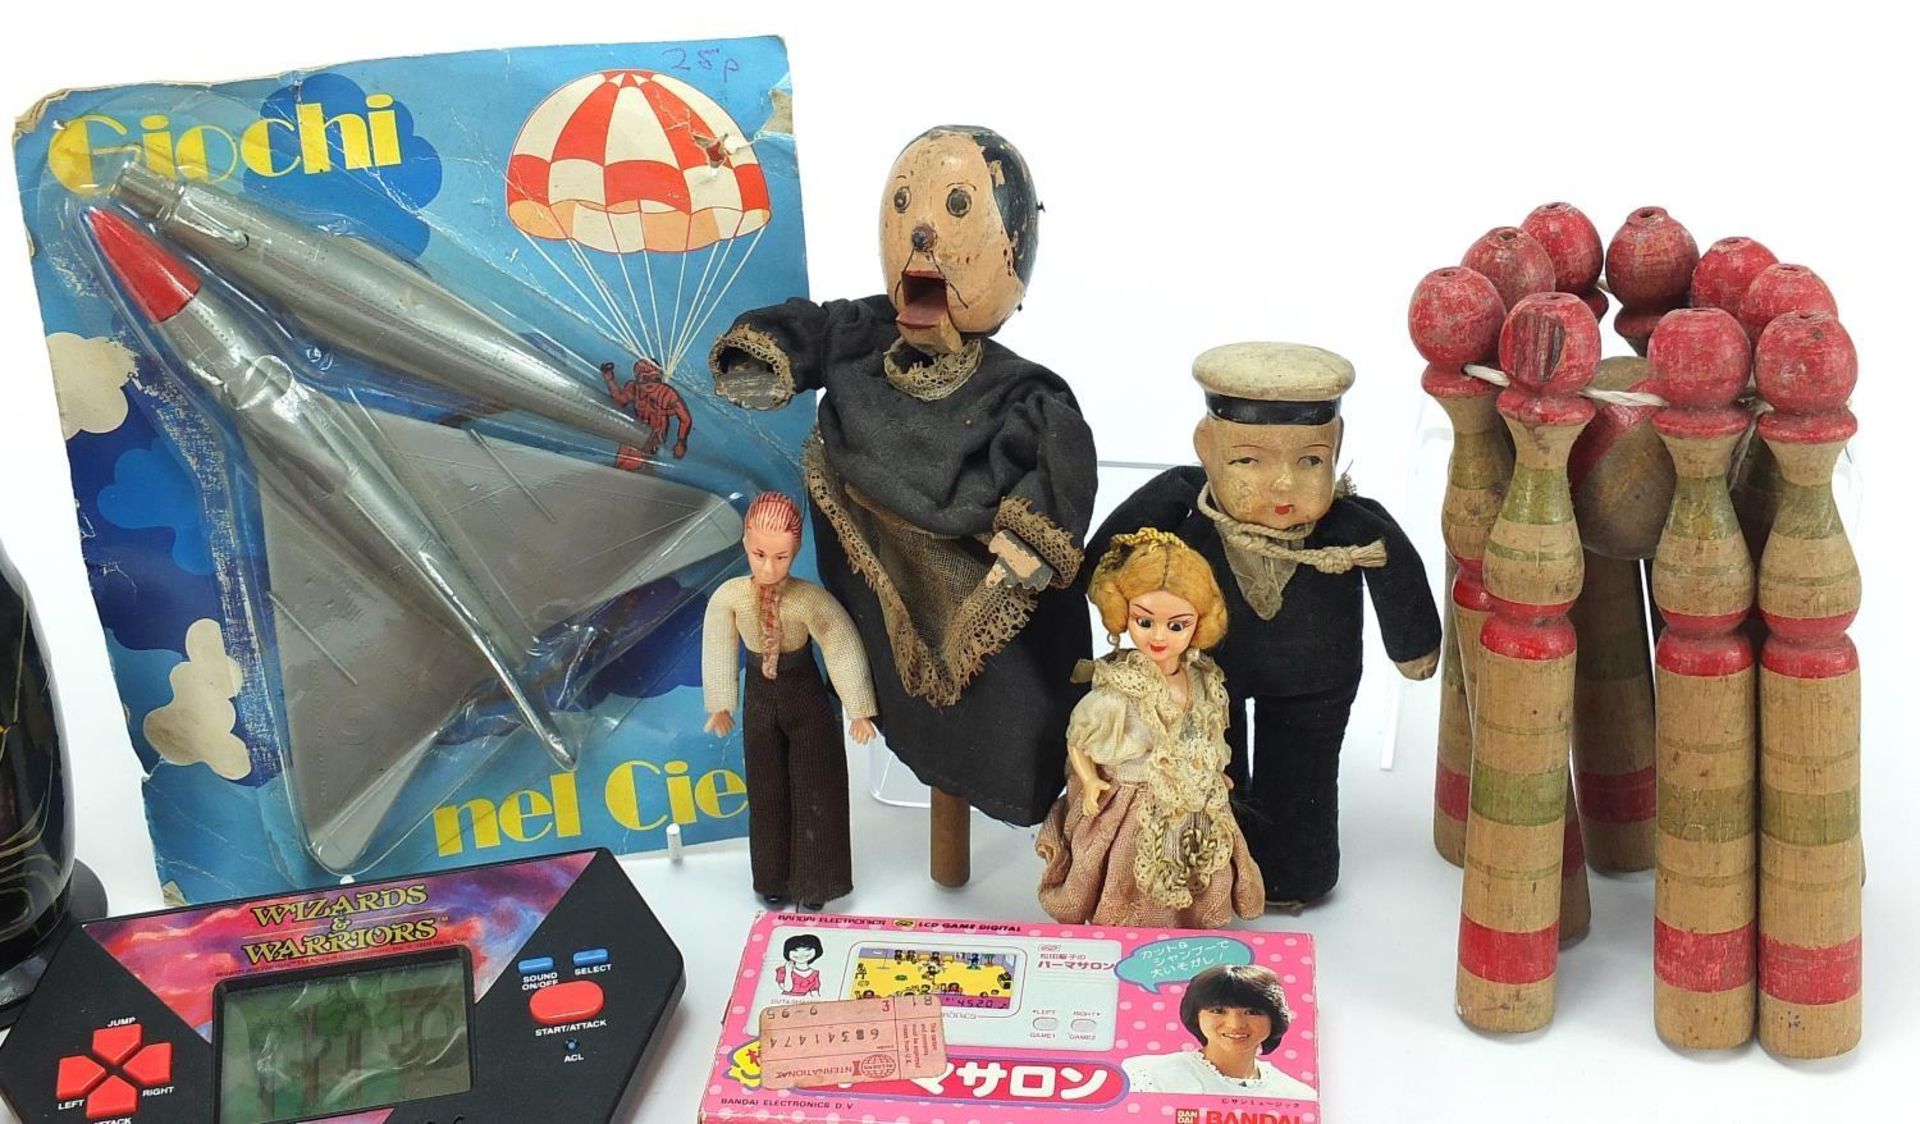 Vintage and later toys including Russian stacking dolls and a Nora Wellings type sailor : - Image 3 of 4